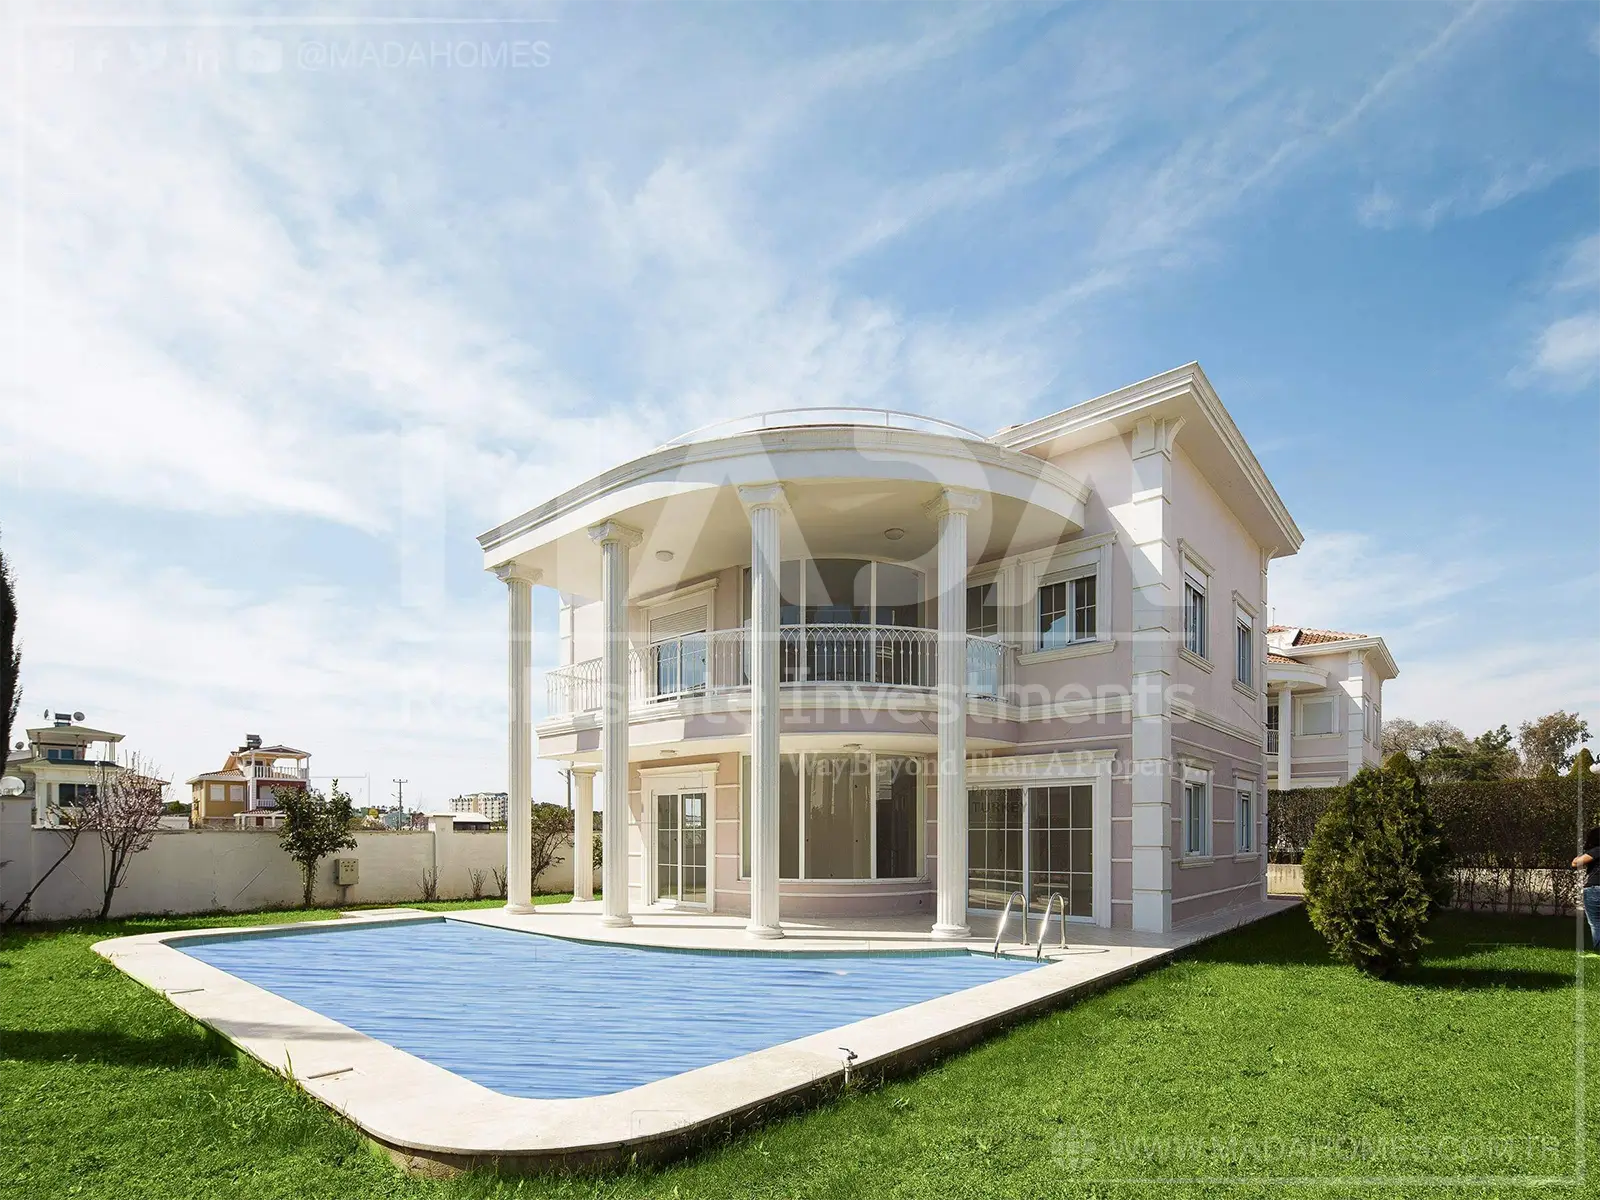 Villas prices in Istanbul